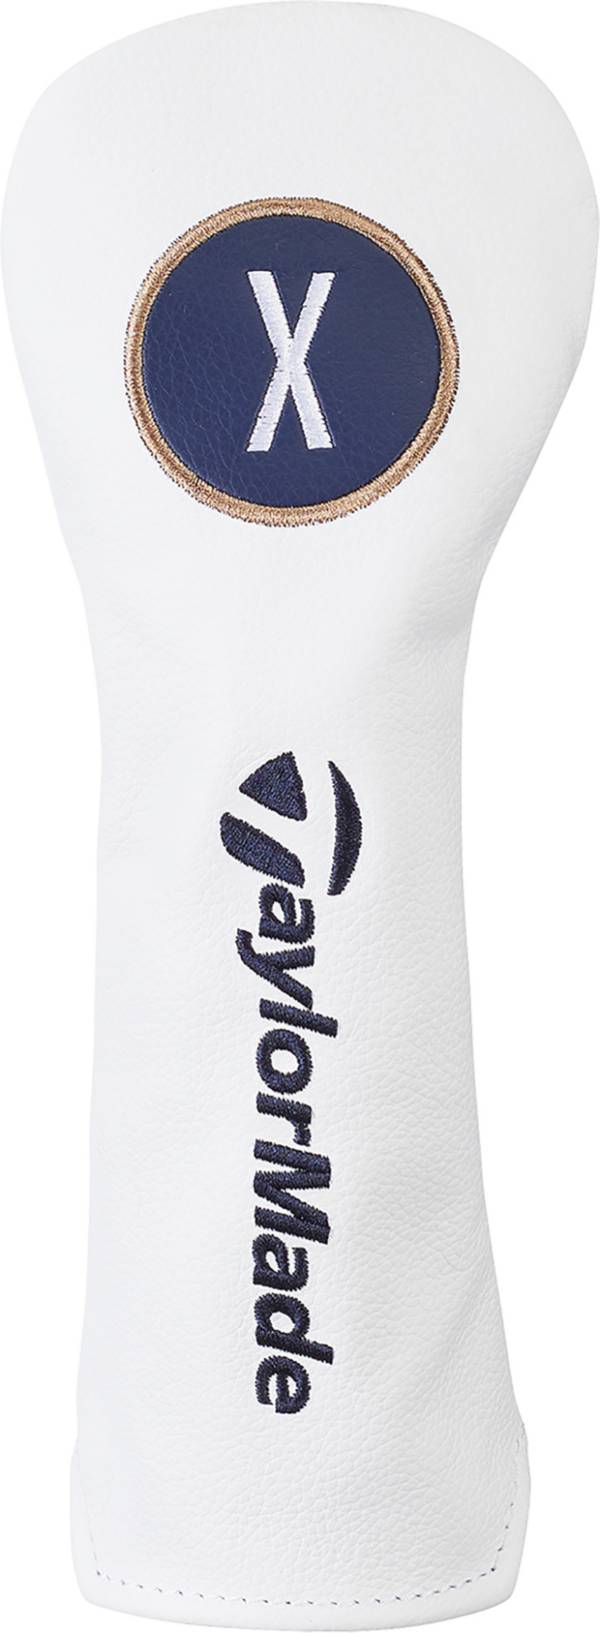 TaylorMade 2022 PGA Championship Hybrid Headcover product image